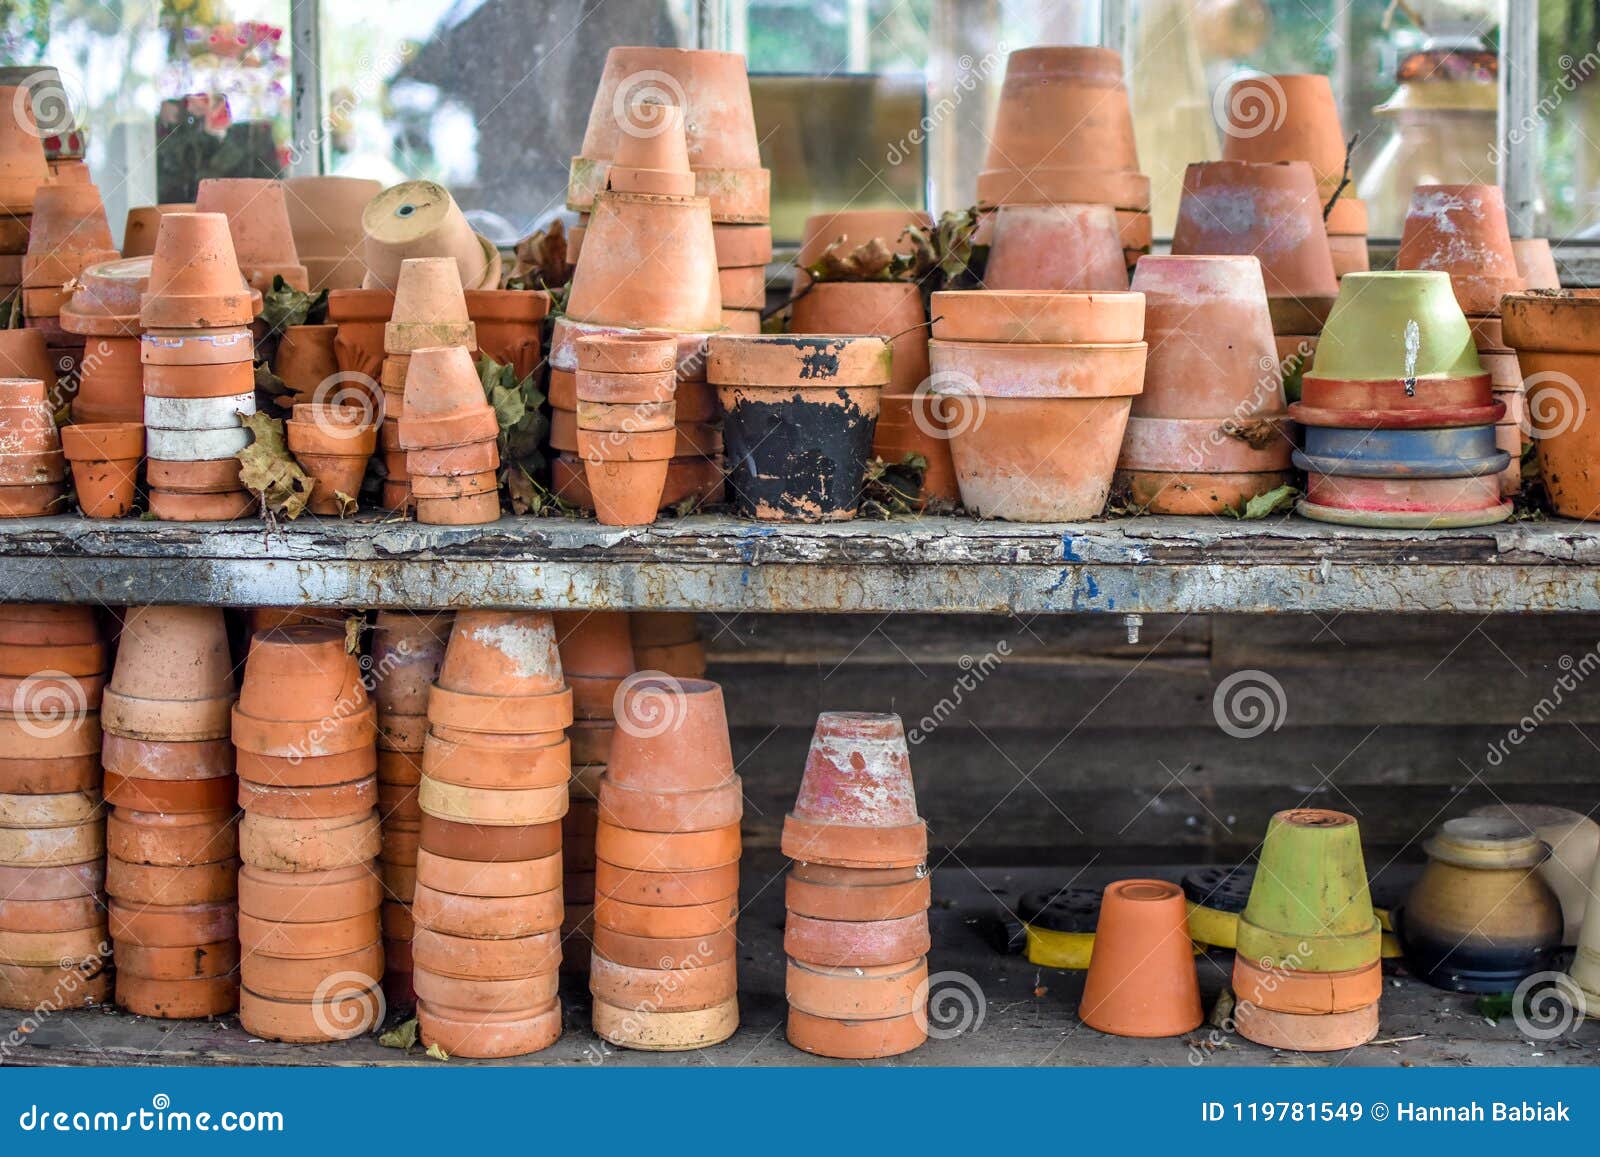 clay flower pots of various sizes